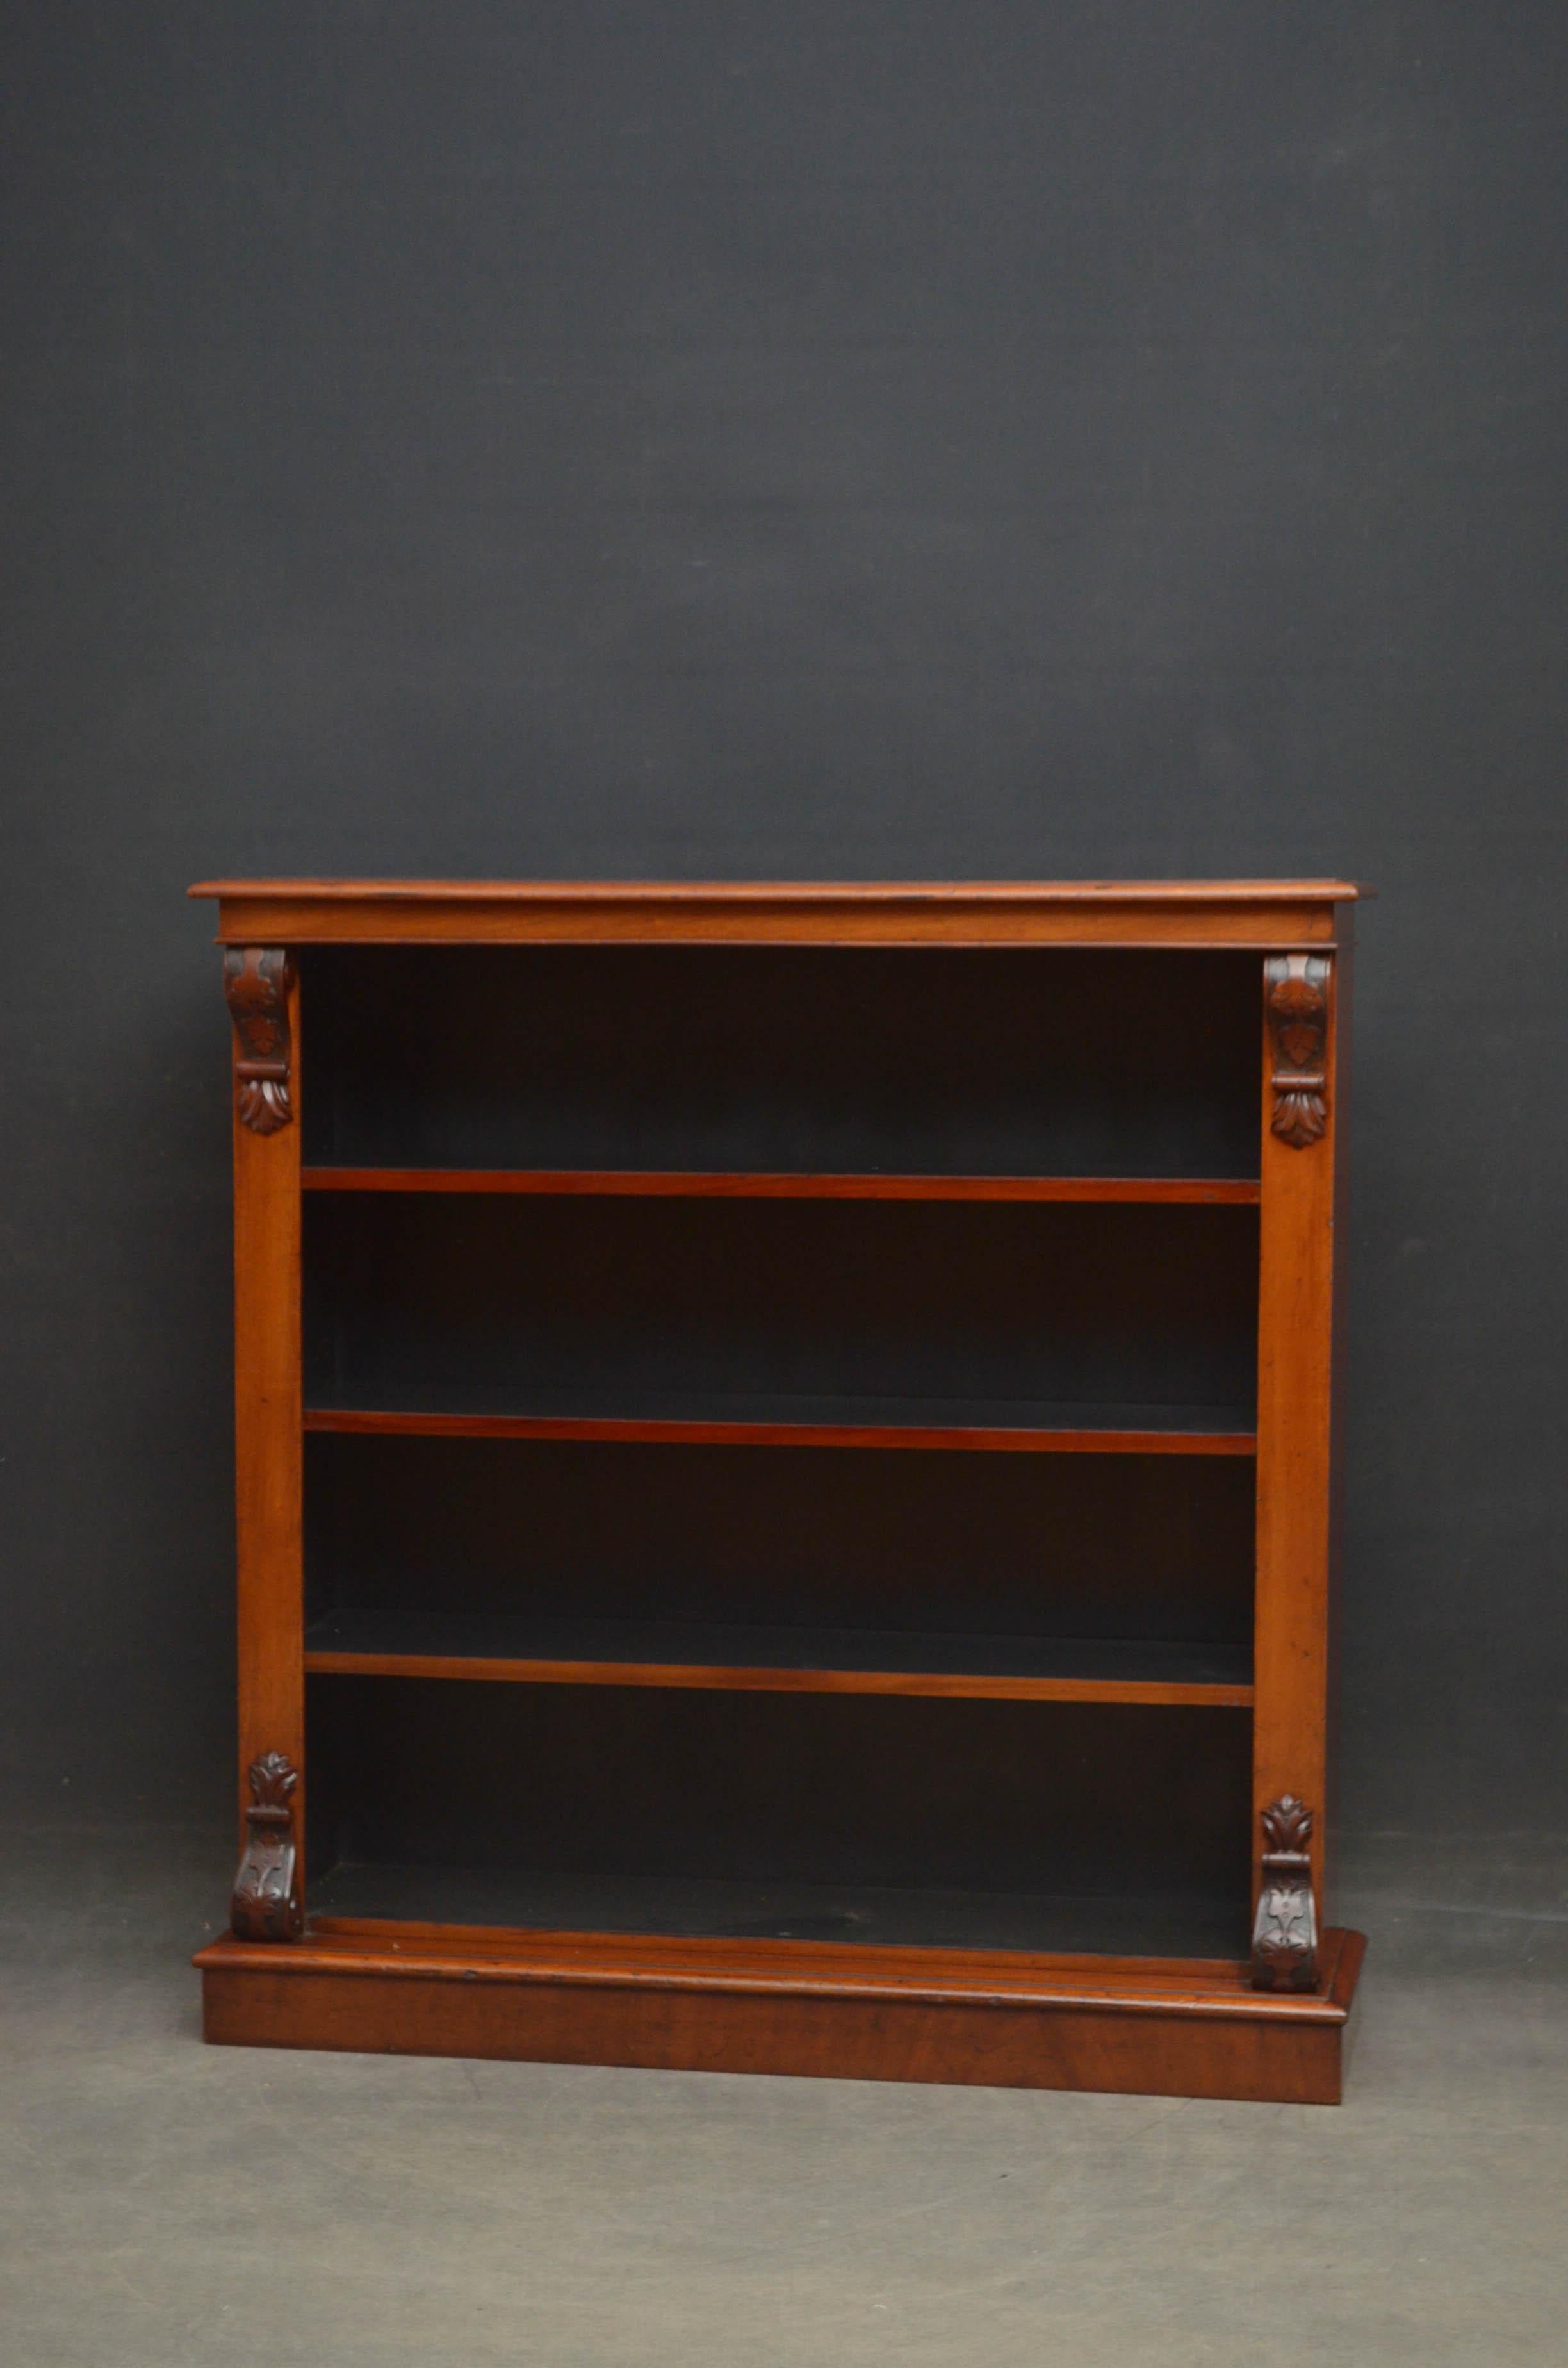 Sn4680 Victorian mahogany open bookcase in light to medium mahogany, having moulded top above 3 height adjustable shelves flanked by Fine quality drop carvings to top and base, all standing on moulded plinth base. This antique bookcase retains its